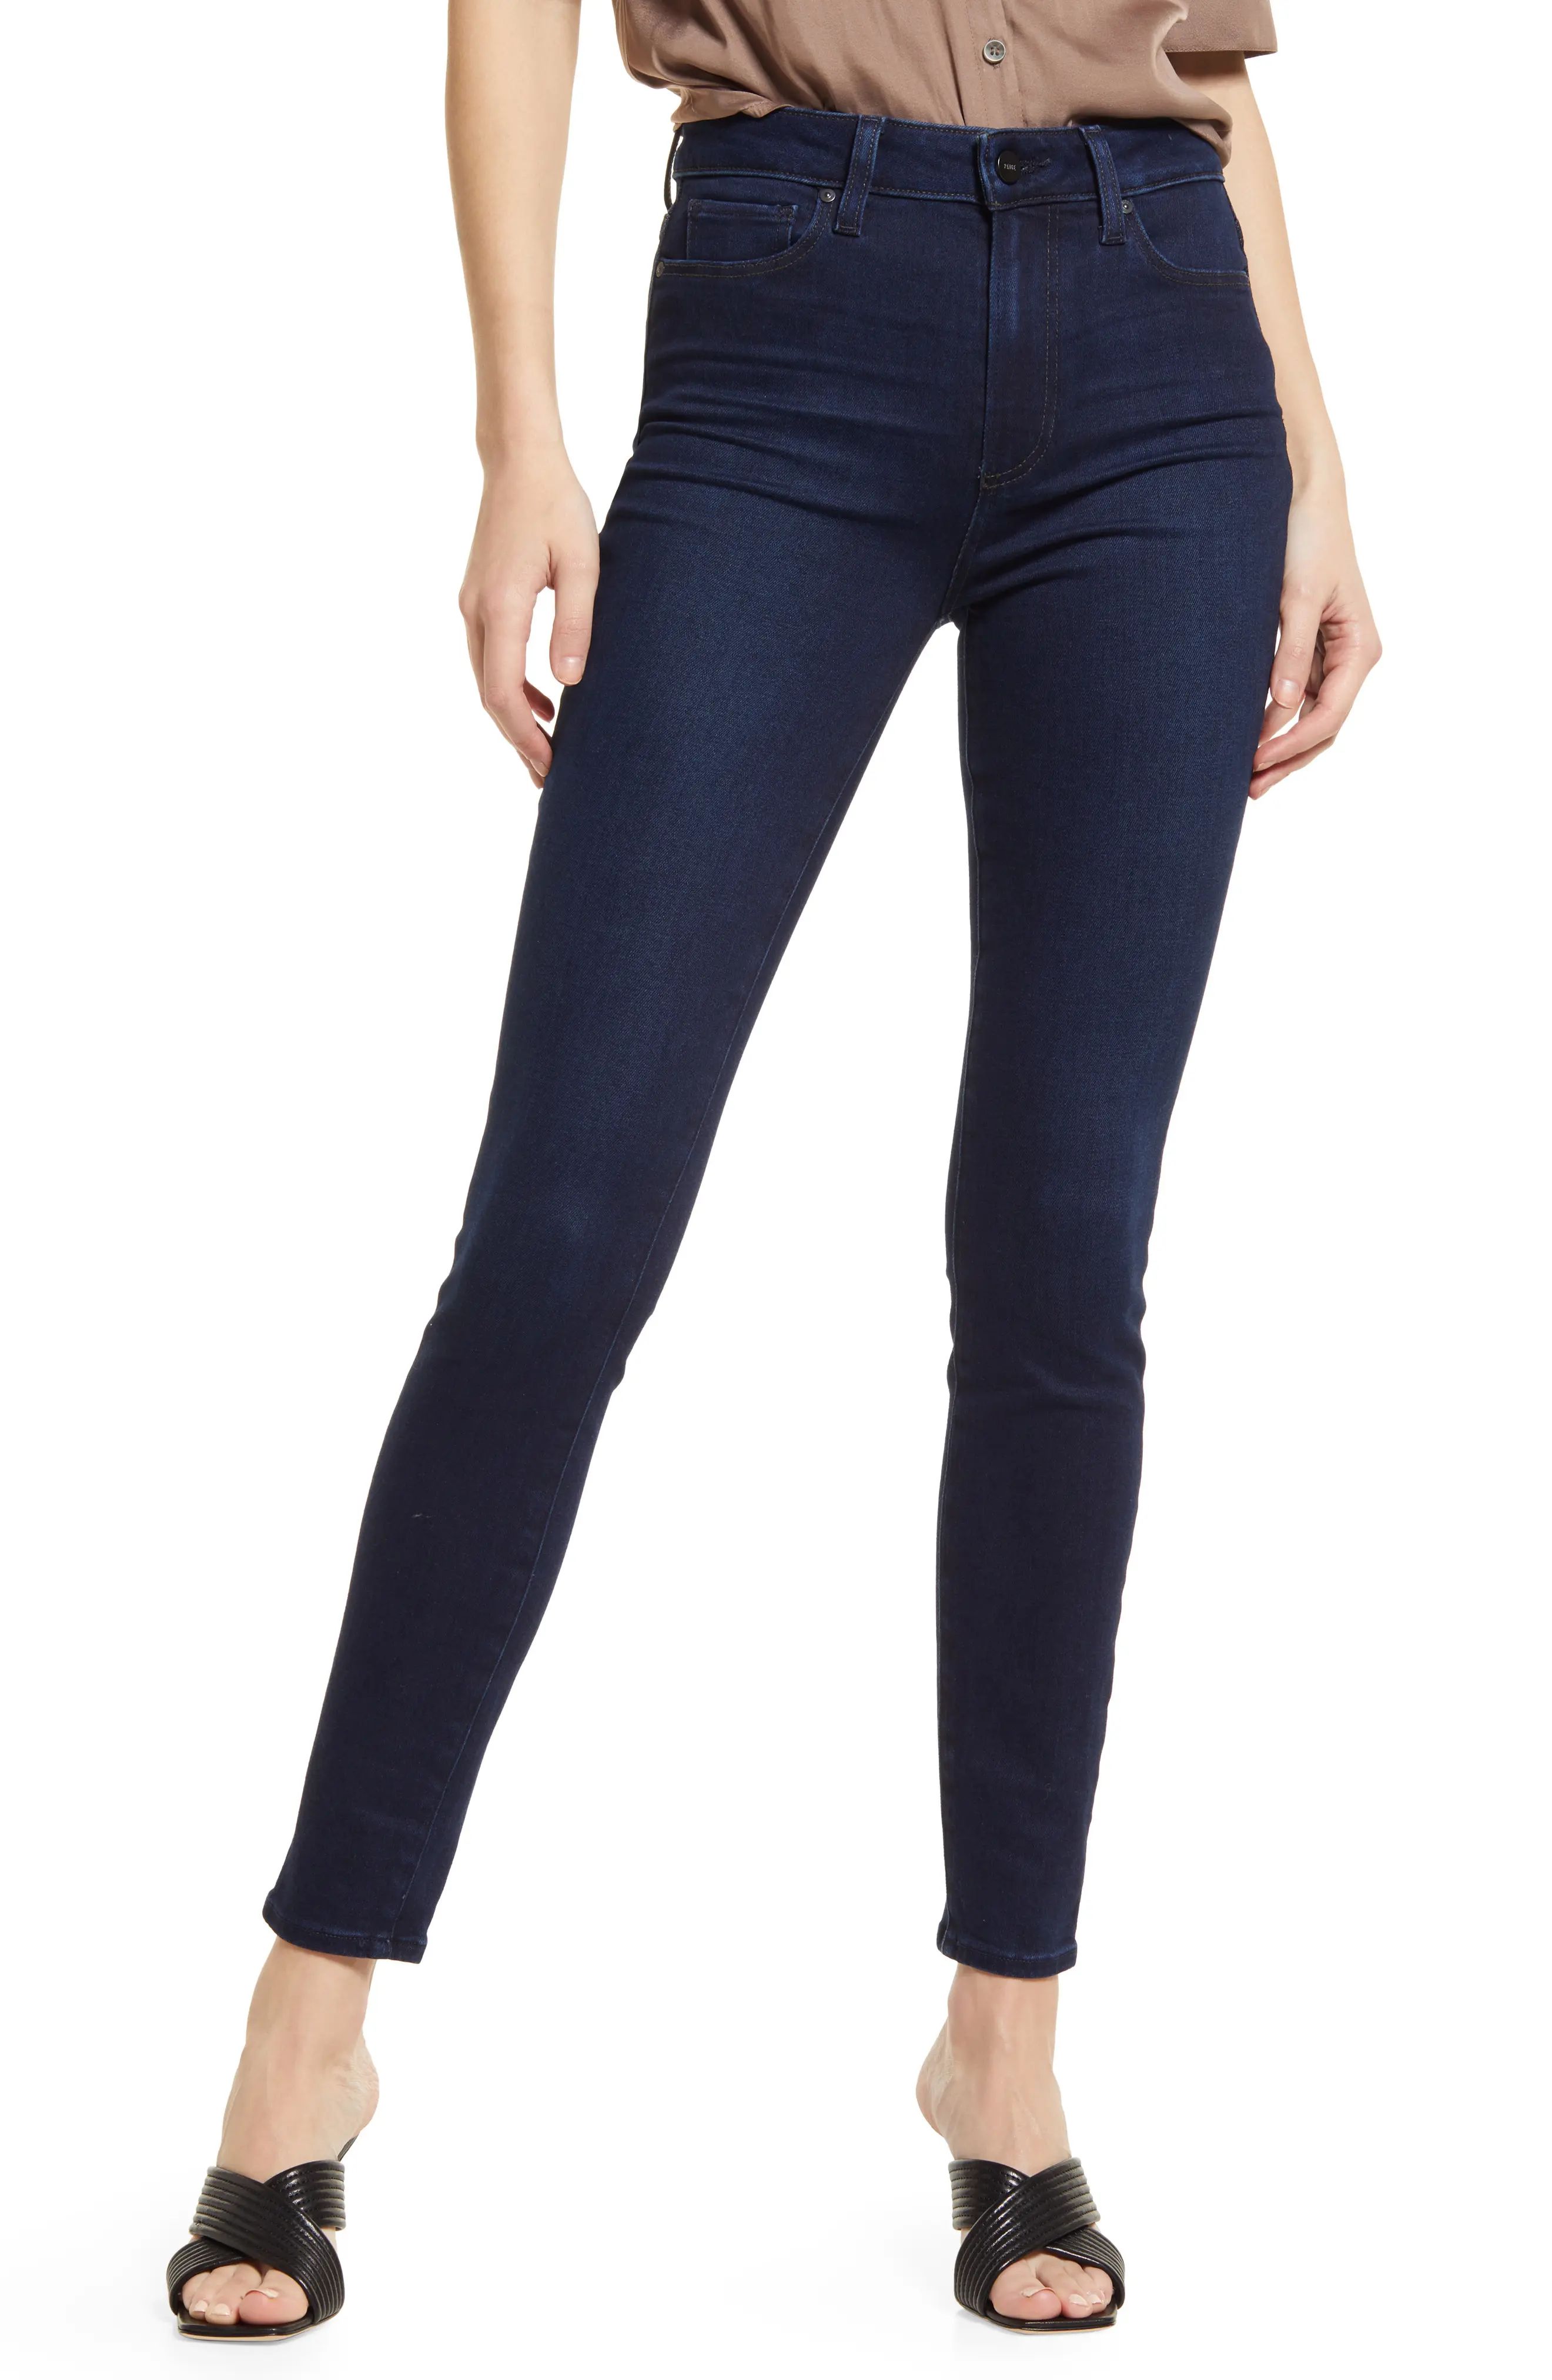 PAIGE Margot High Waist Ultra Skinny Jeans in Louvre at Nordstrom, Size 27 | Nordstrom